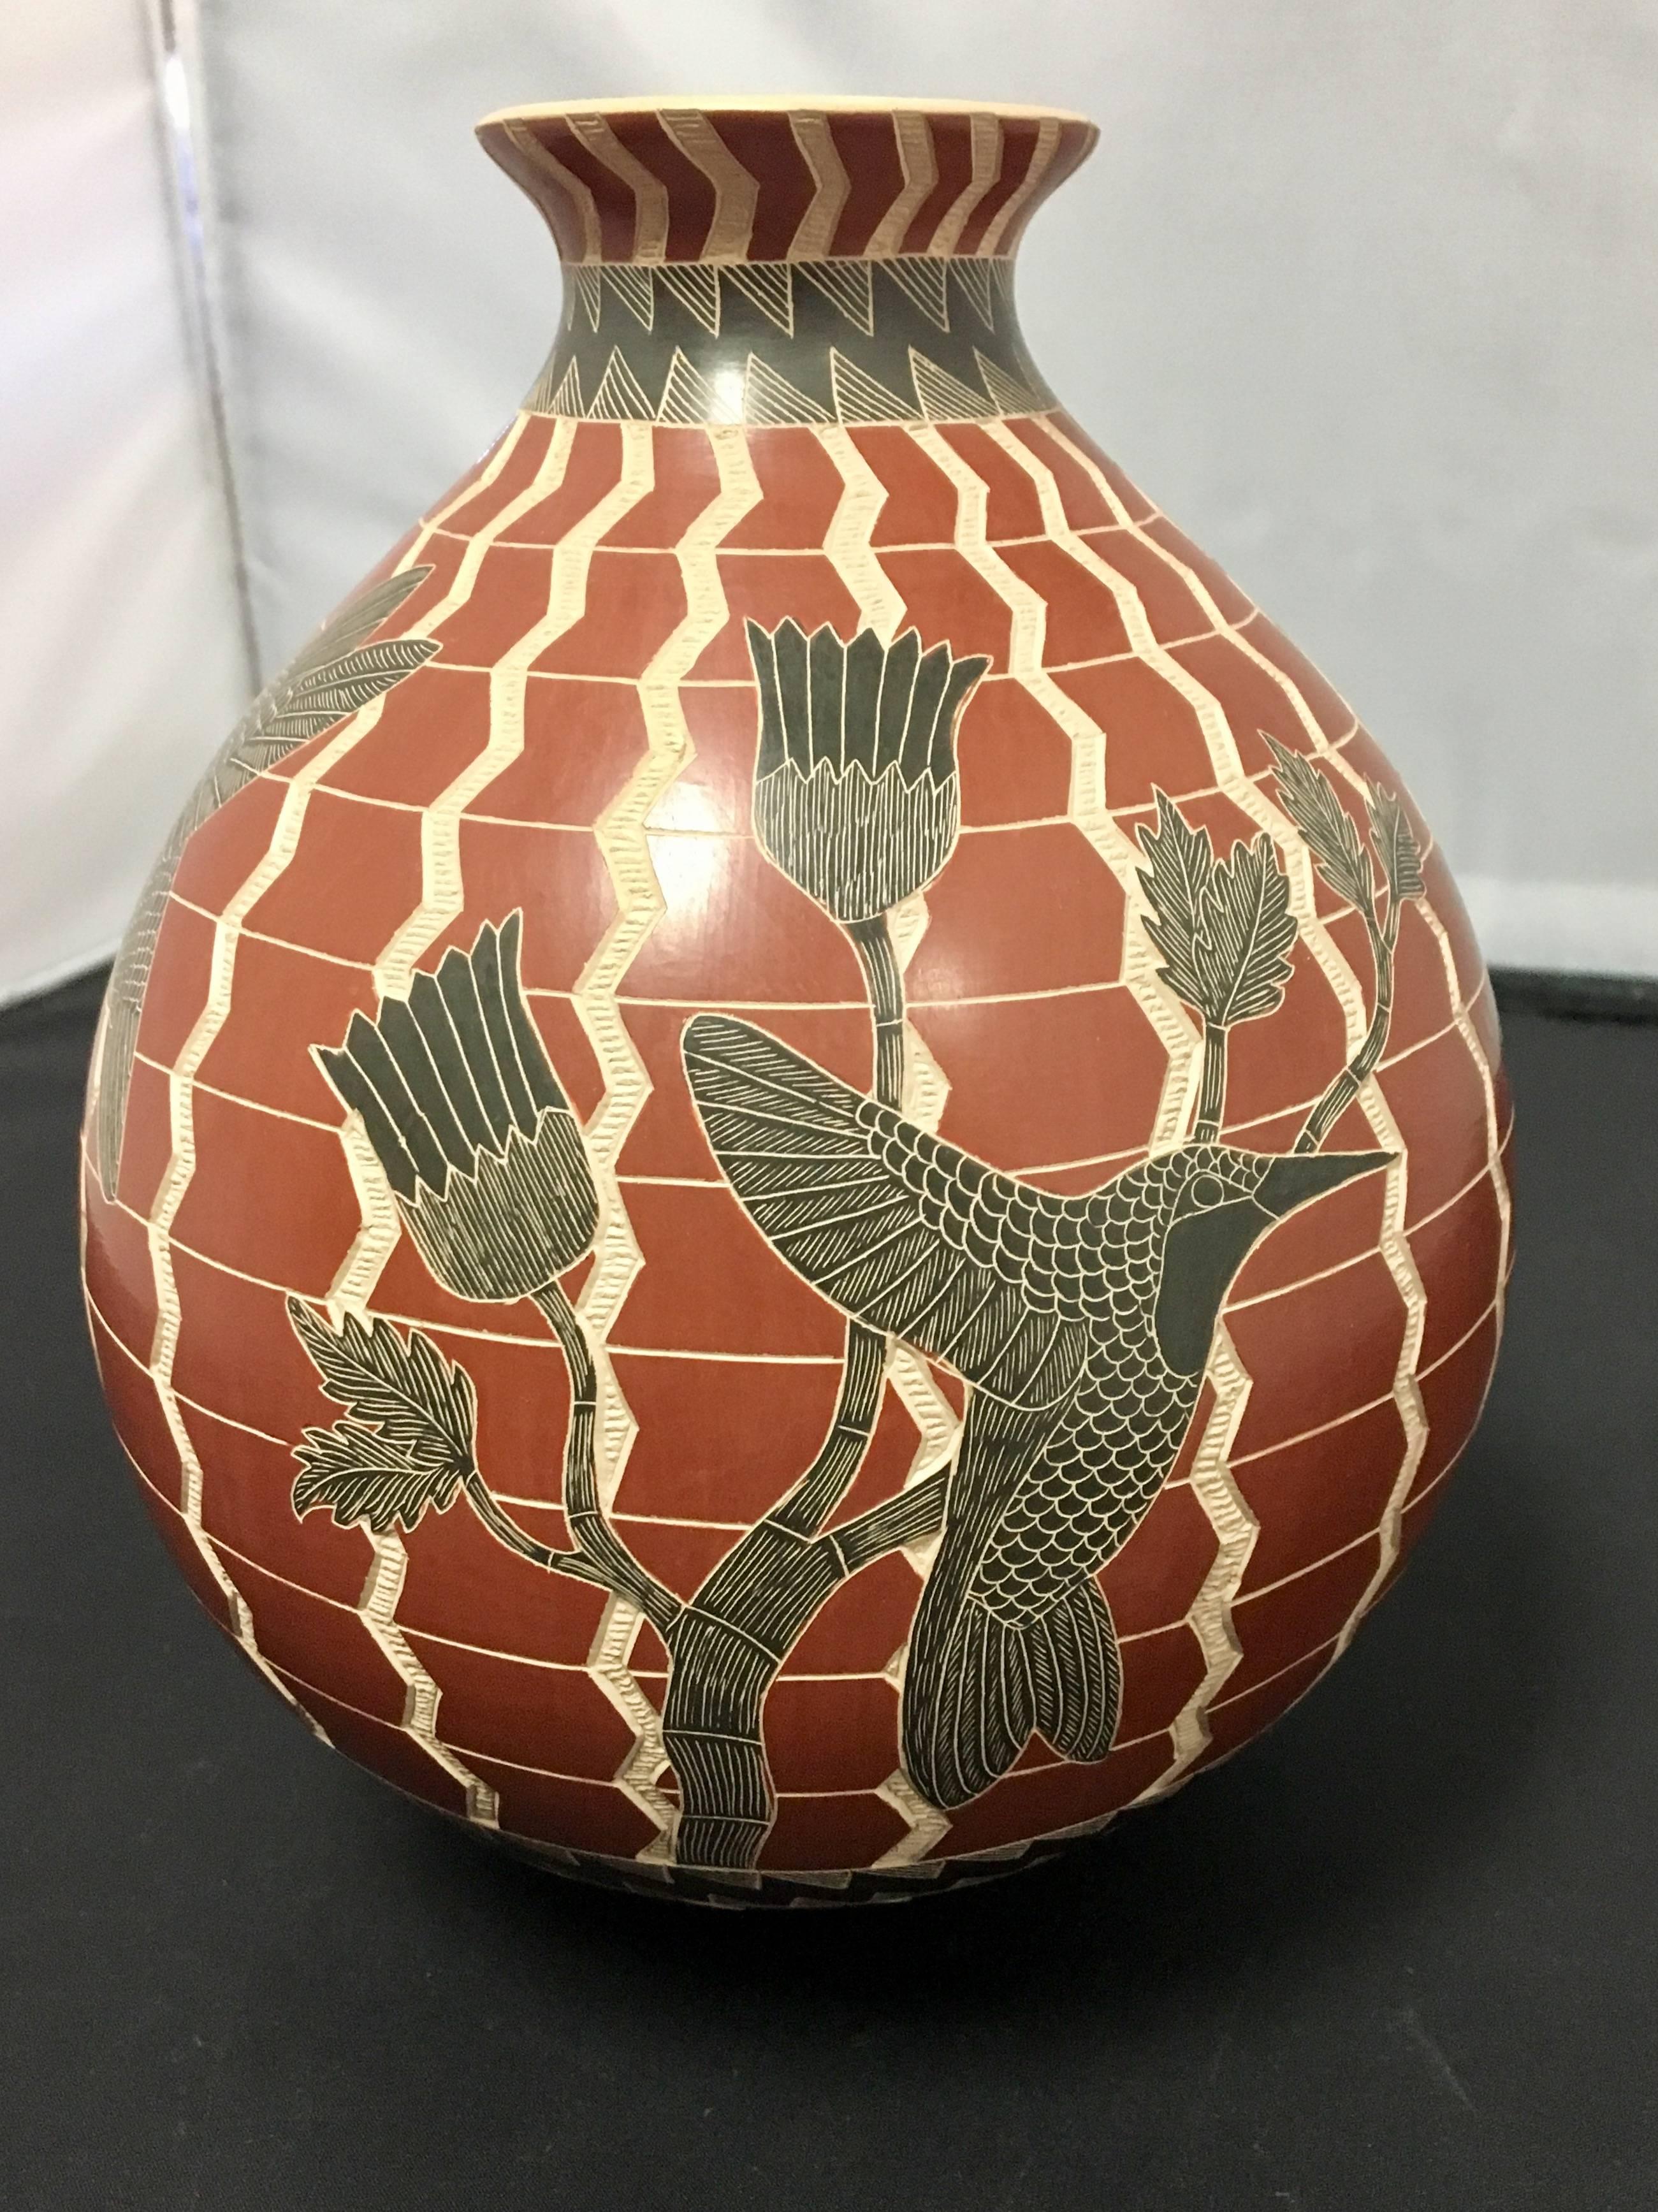 Beautiful hand-turned Mata Ortiz pottery vase / olla by Ricardo Delgado Cruz. The piece has exquisite detail and a hummingbird / floral motiff. Excellent. high quality piece.